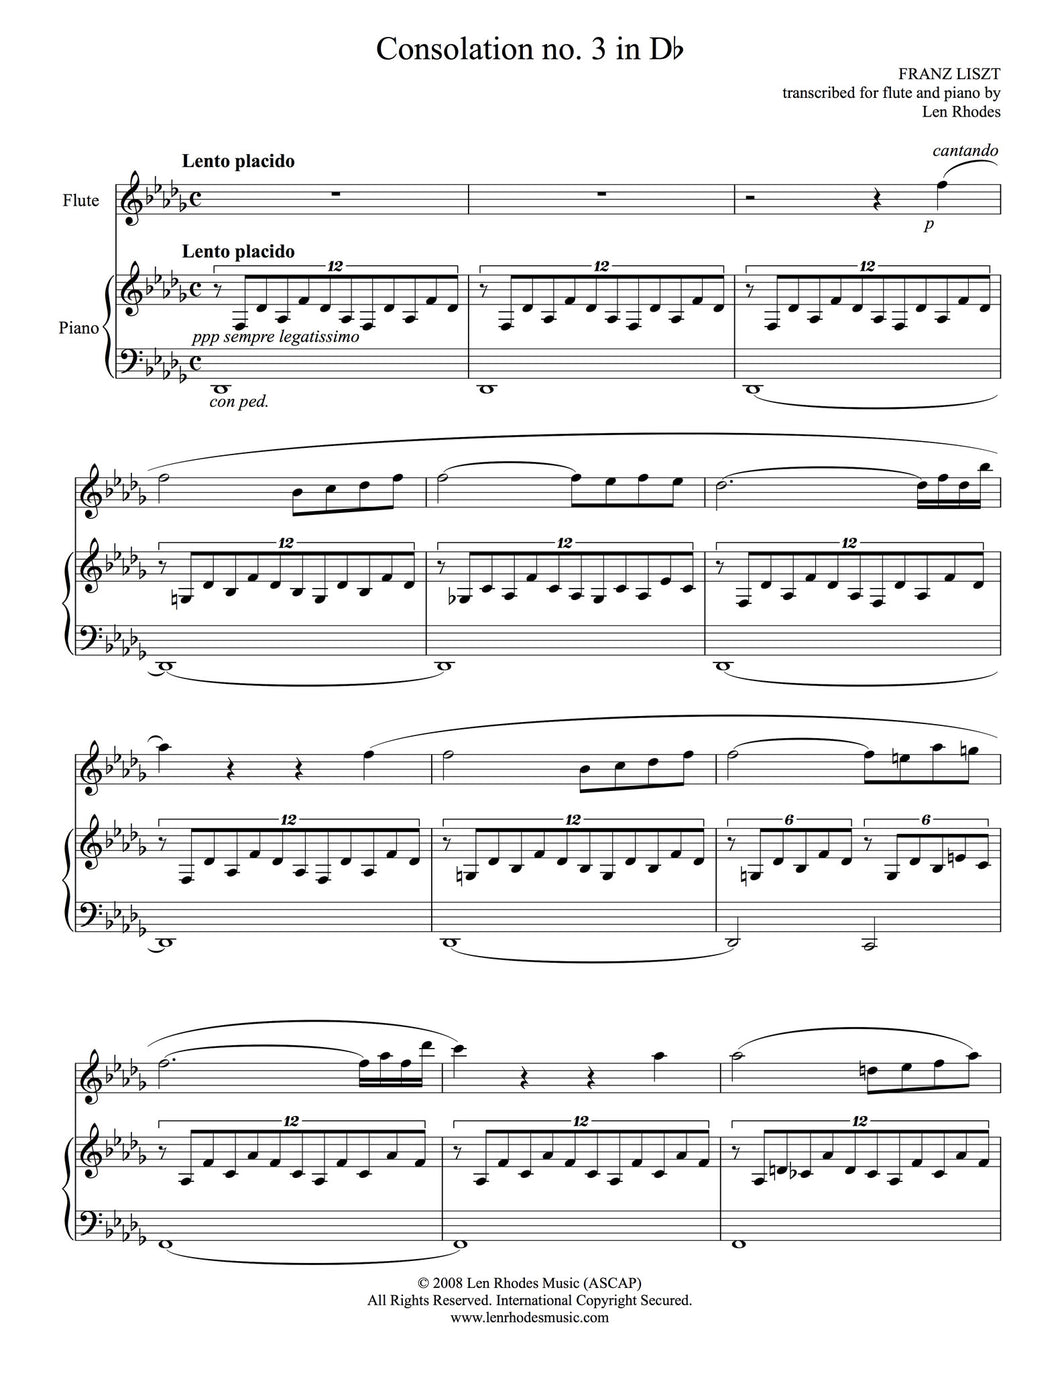 Consolation No. 3 in D flat, Liszt - Flute and Piano